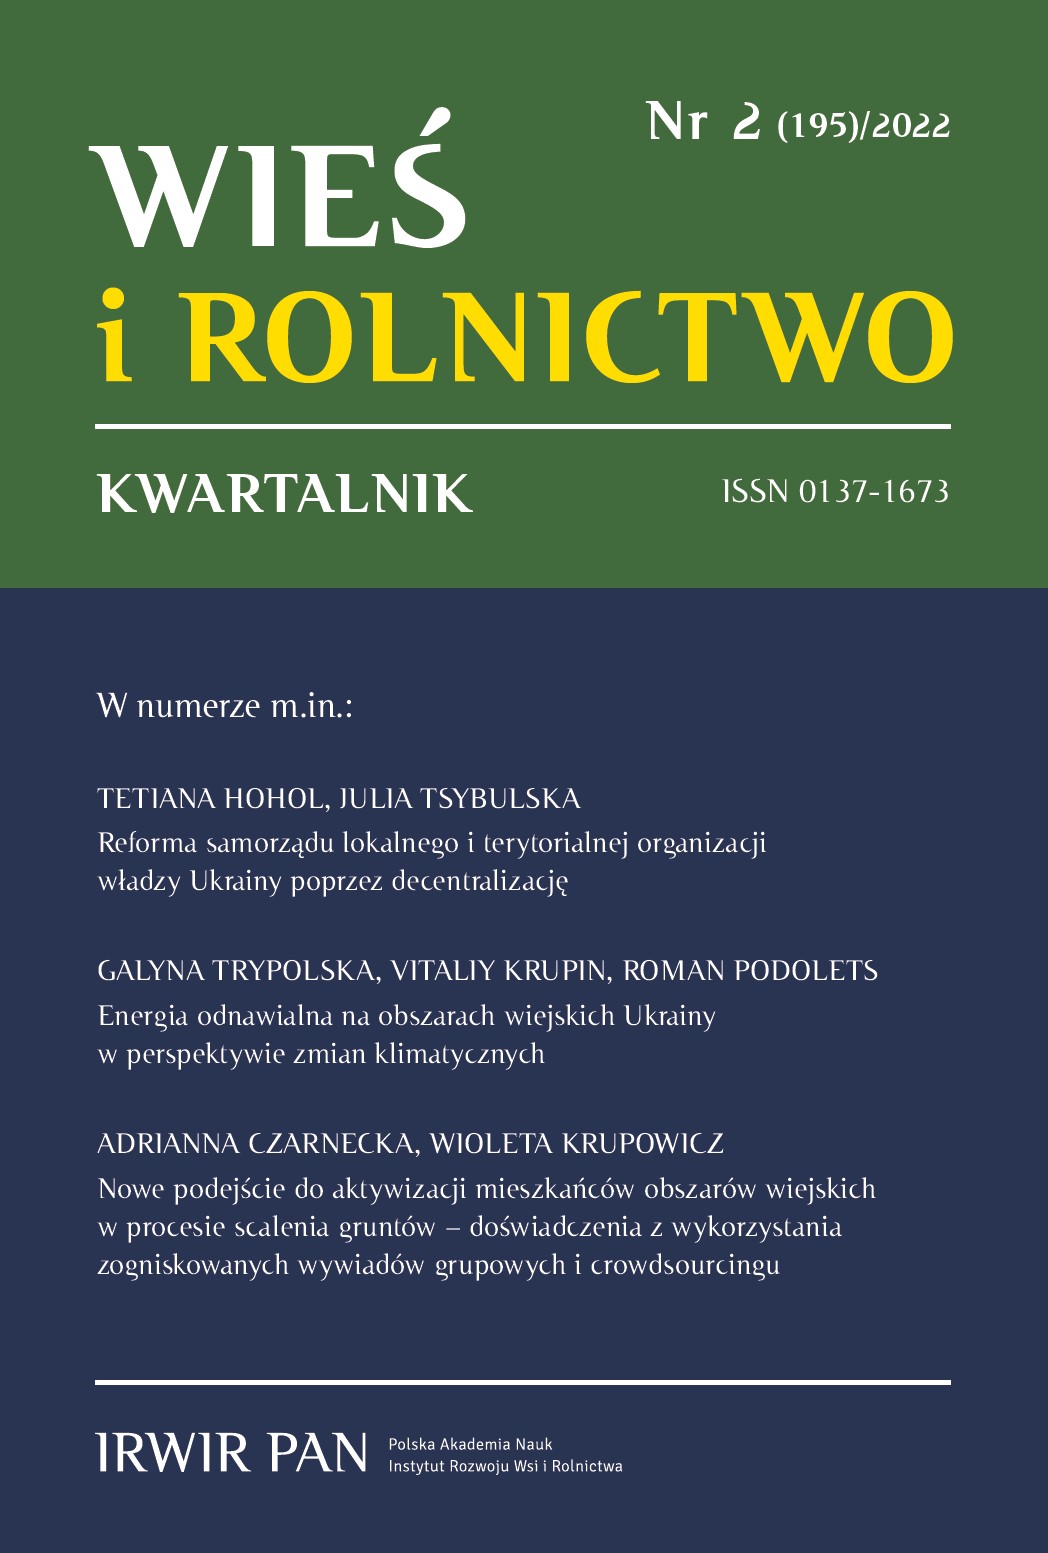 Five Debates for the Fiftieth Anniversary of the Institute of Rural and Agricultural Development of the Polish Academy of Sciences – Report by the Young Scholars Cover Image